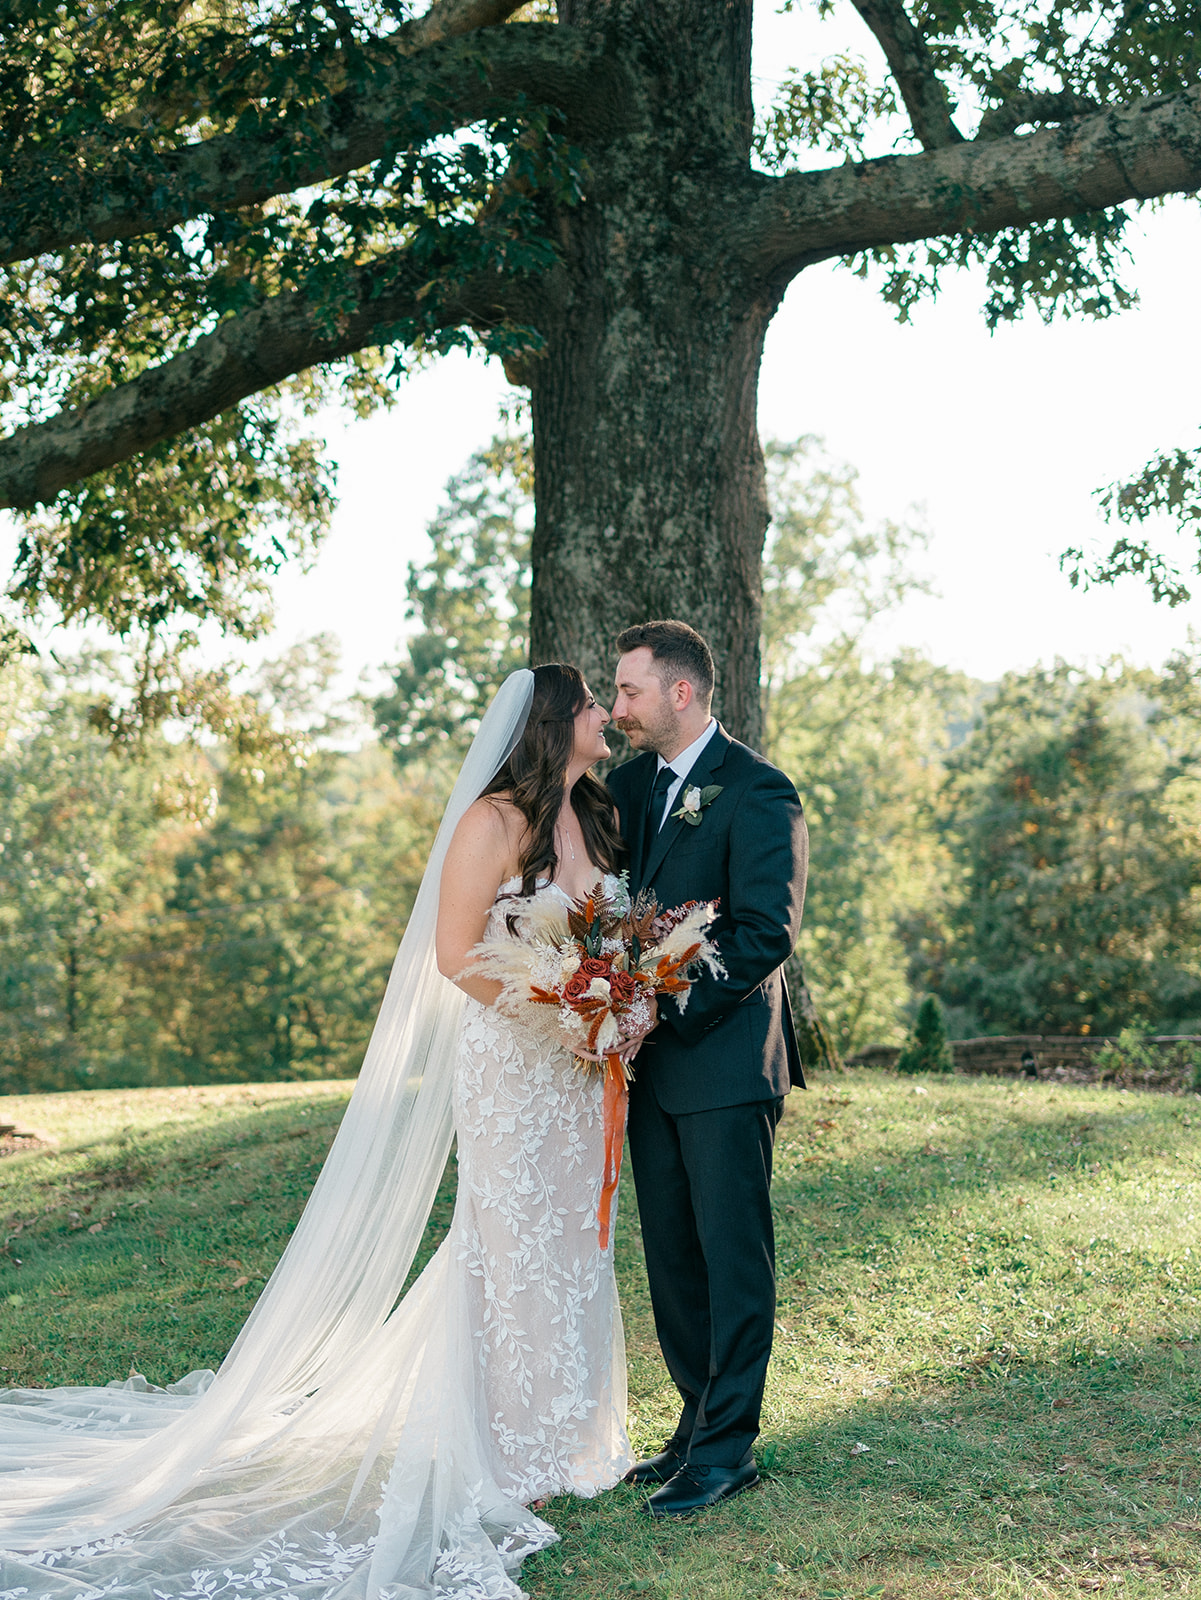 Newlyweds lean in for a kiss under a tree at sunset